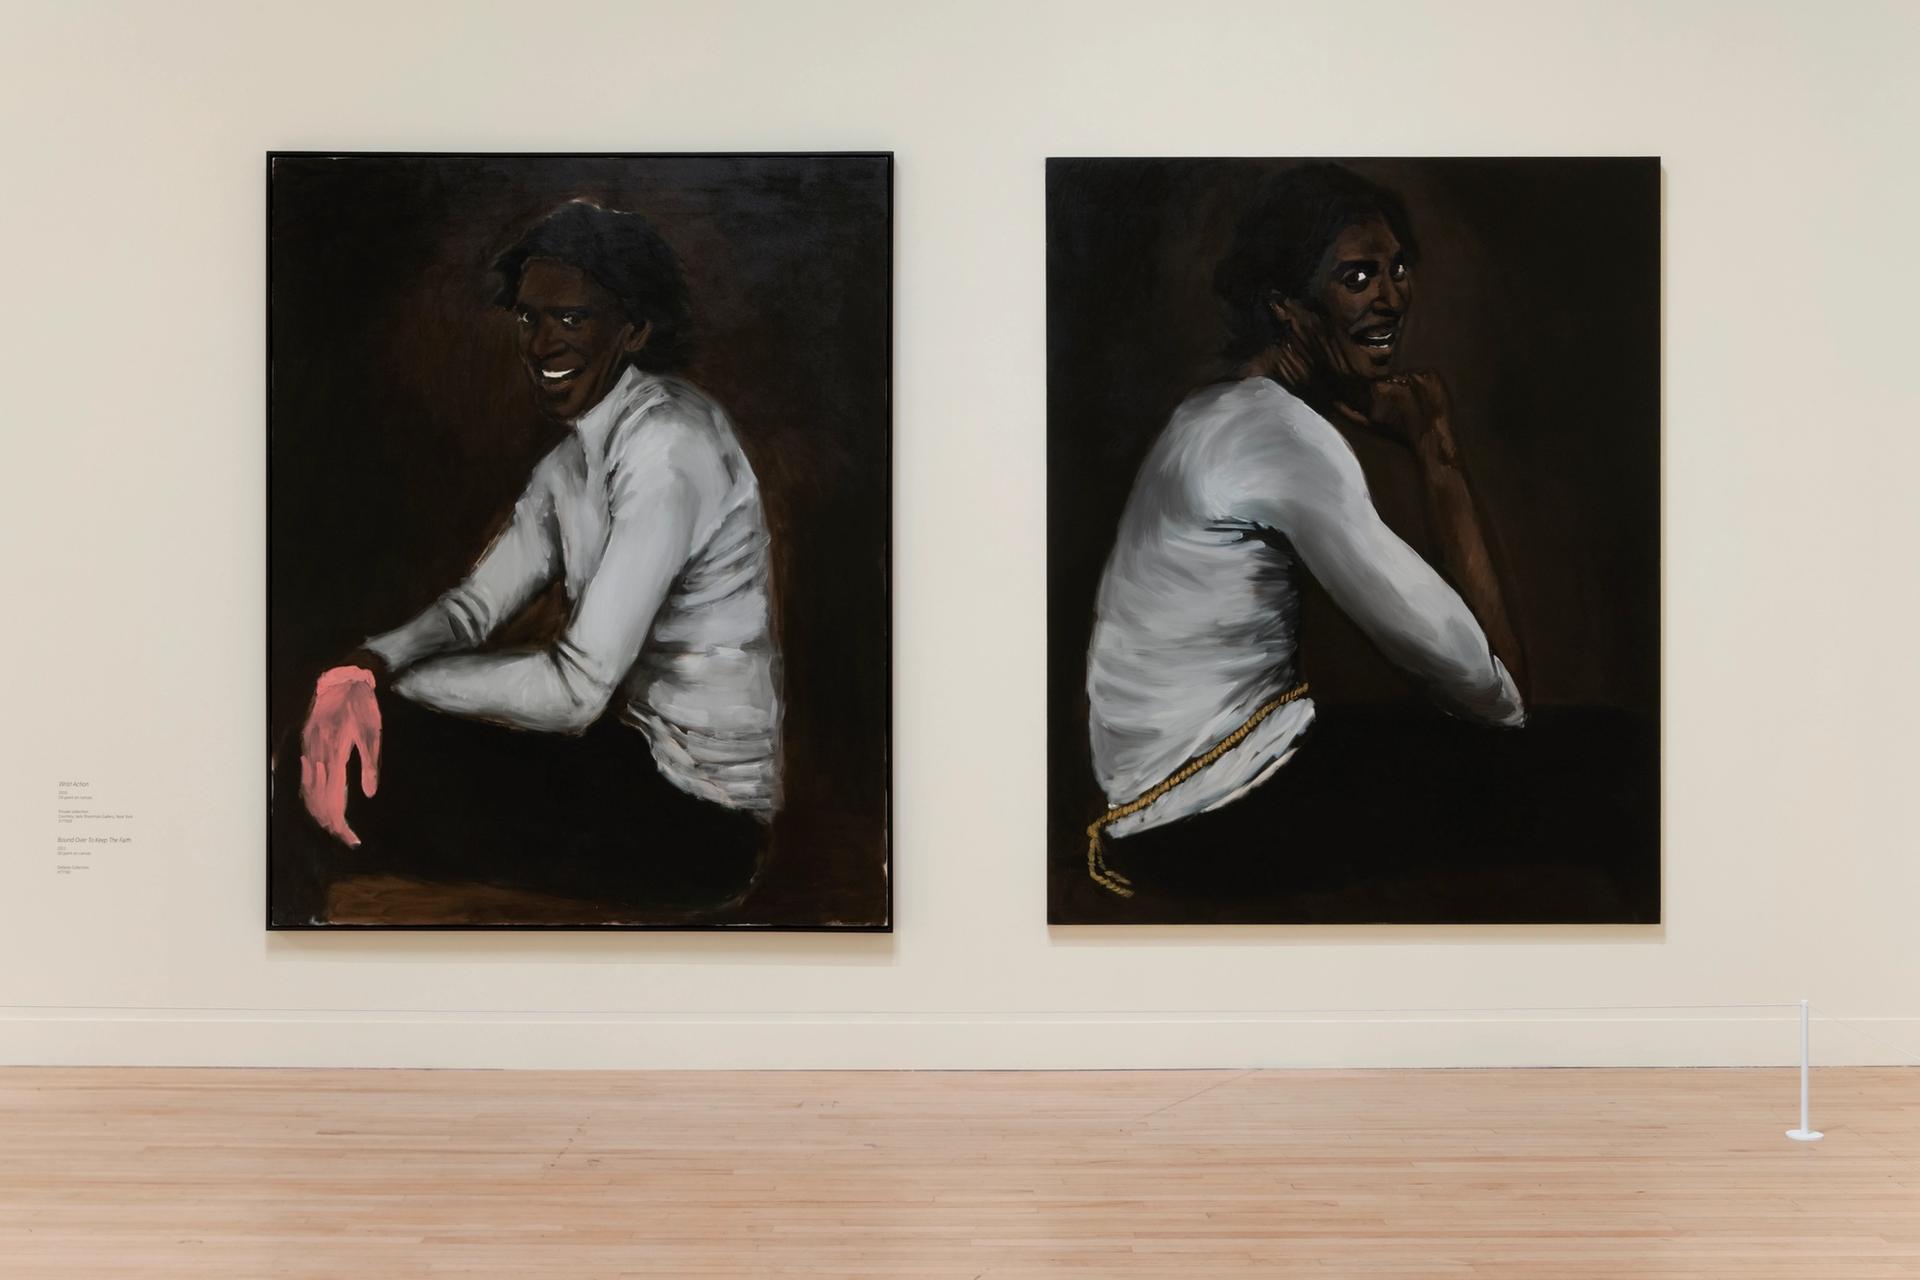 Lynette Yiadom-Boakye: Fly In League With the Night at Tate Britain Photo: Tate (Seraphina Neville)